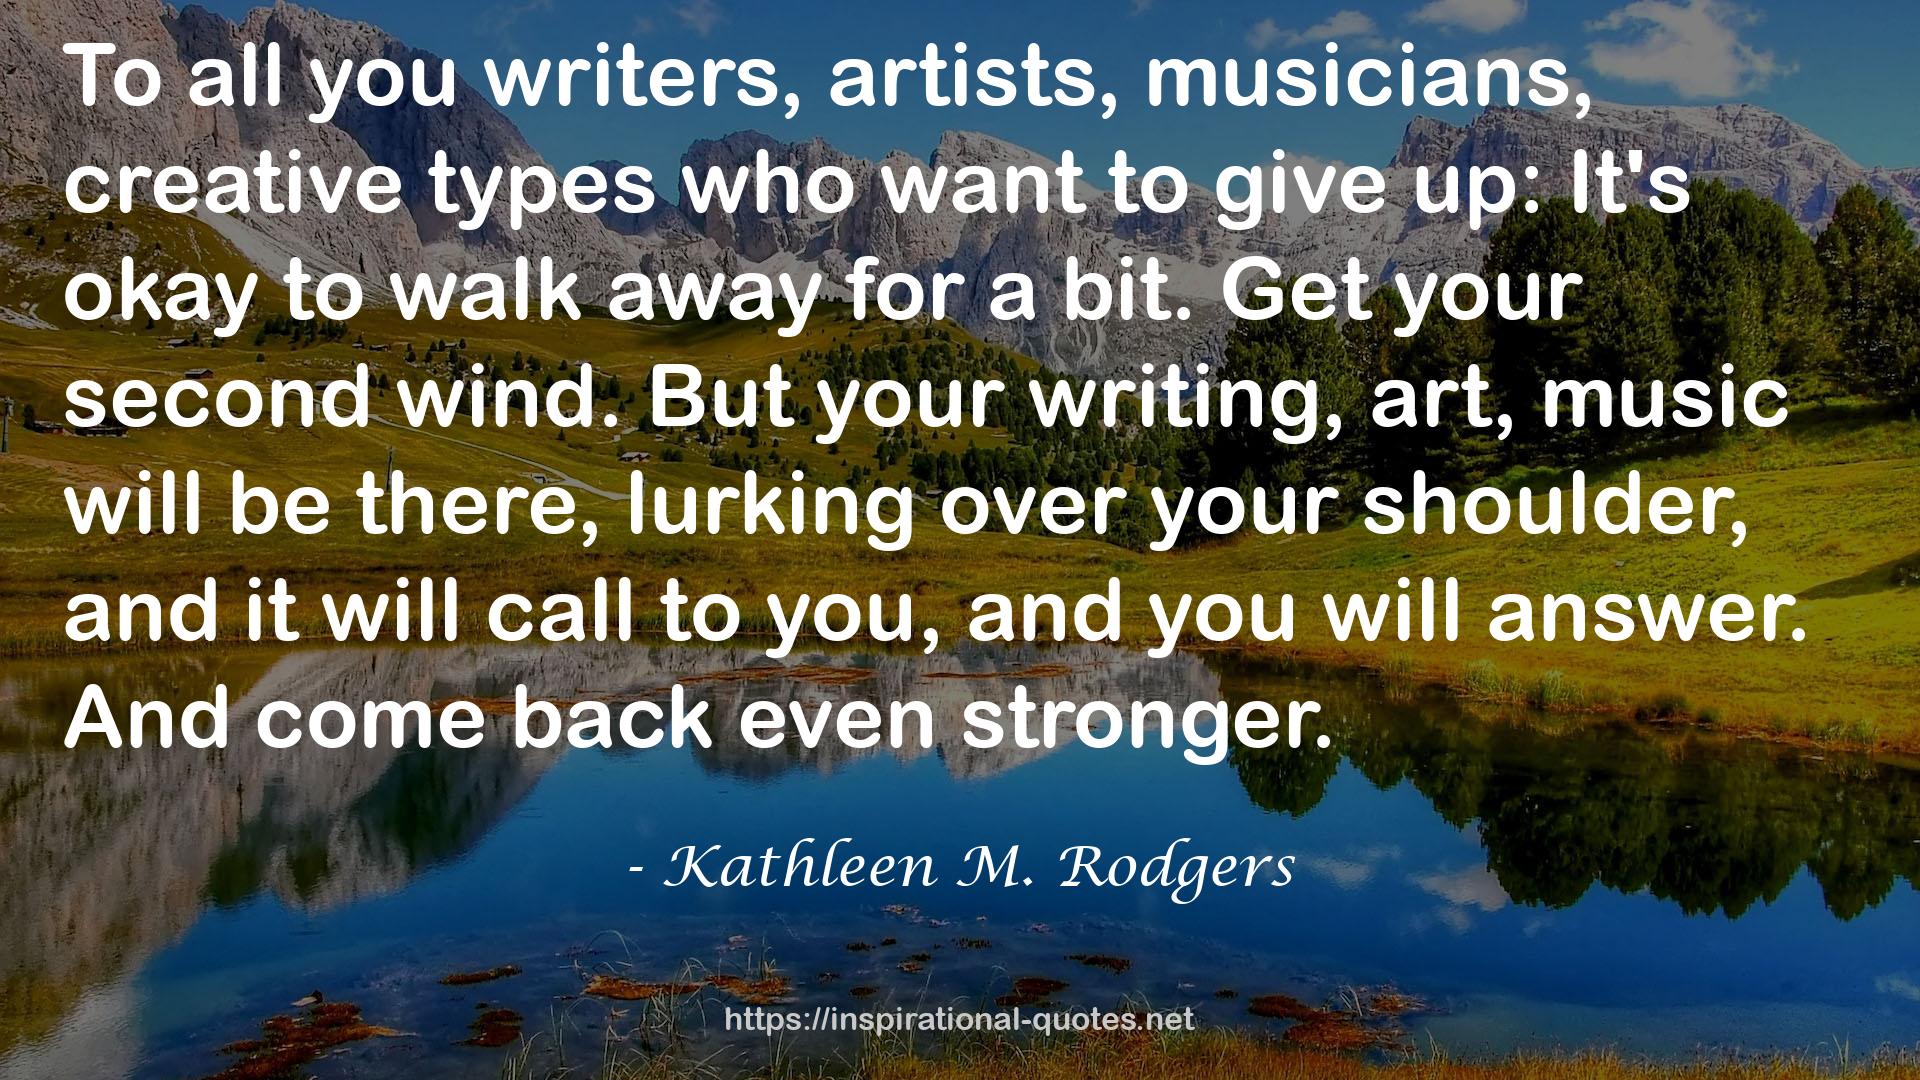 Kathleen M. Rodgers QUOTES